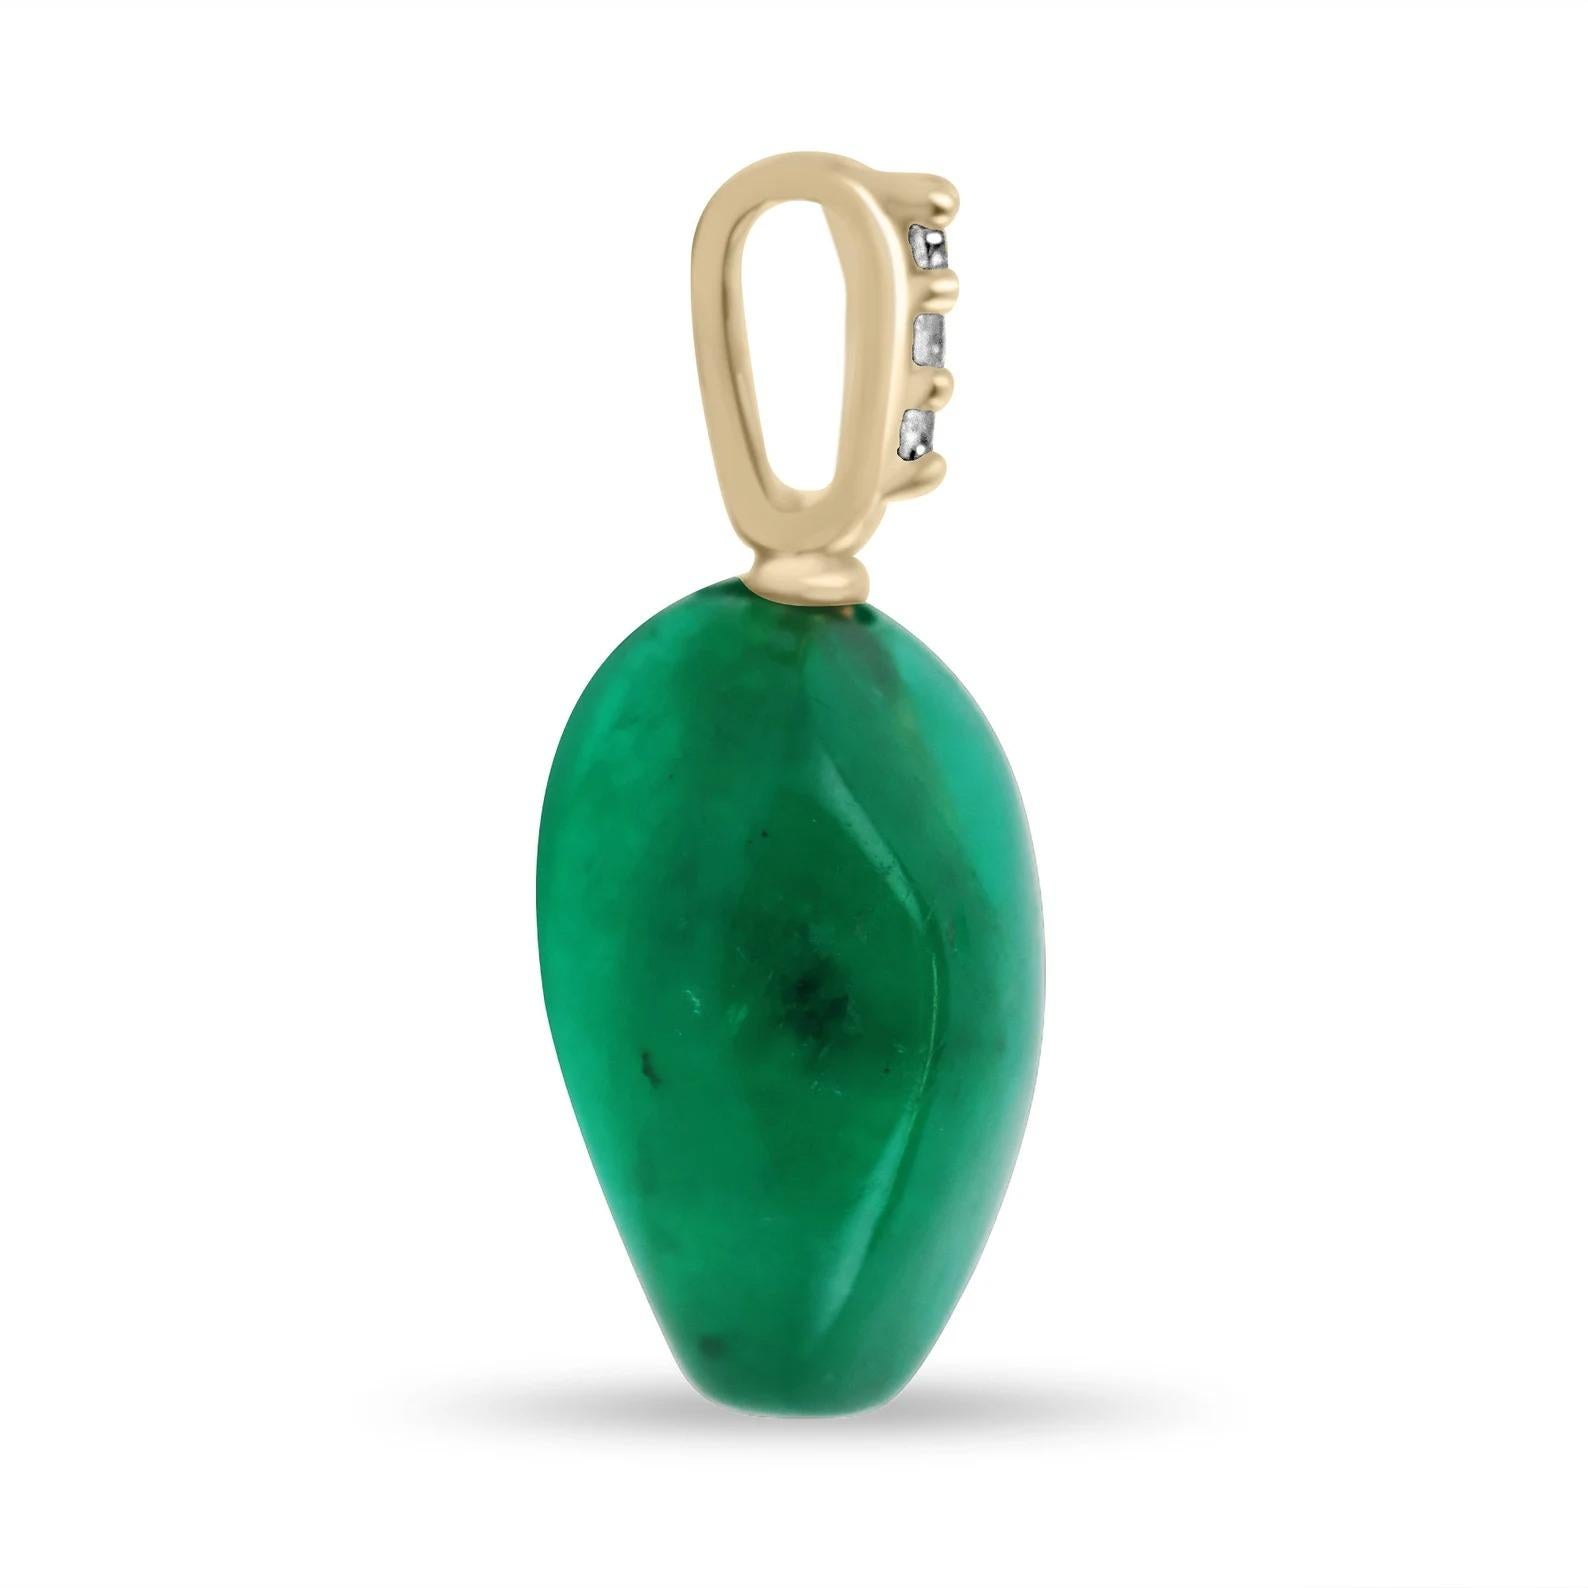 A stunning natural emerald baroque pendant. A fine thin 18K yellow gold pin, penetrates into a natural Colombian emerald baroque of fine quality. Displaying a vivid and deep medium-dark green color with excellent luster and clarity. At the top of